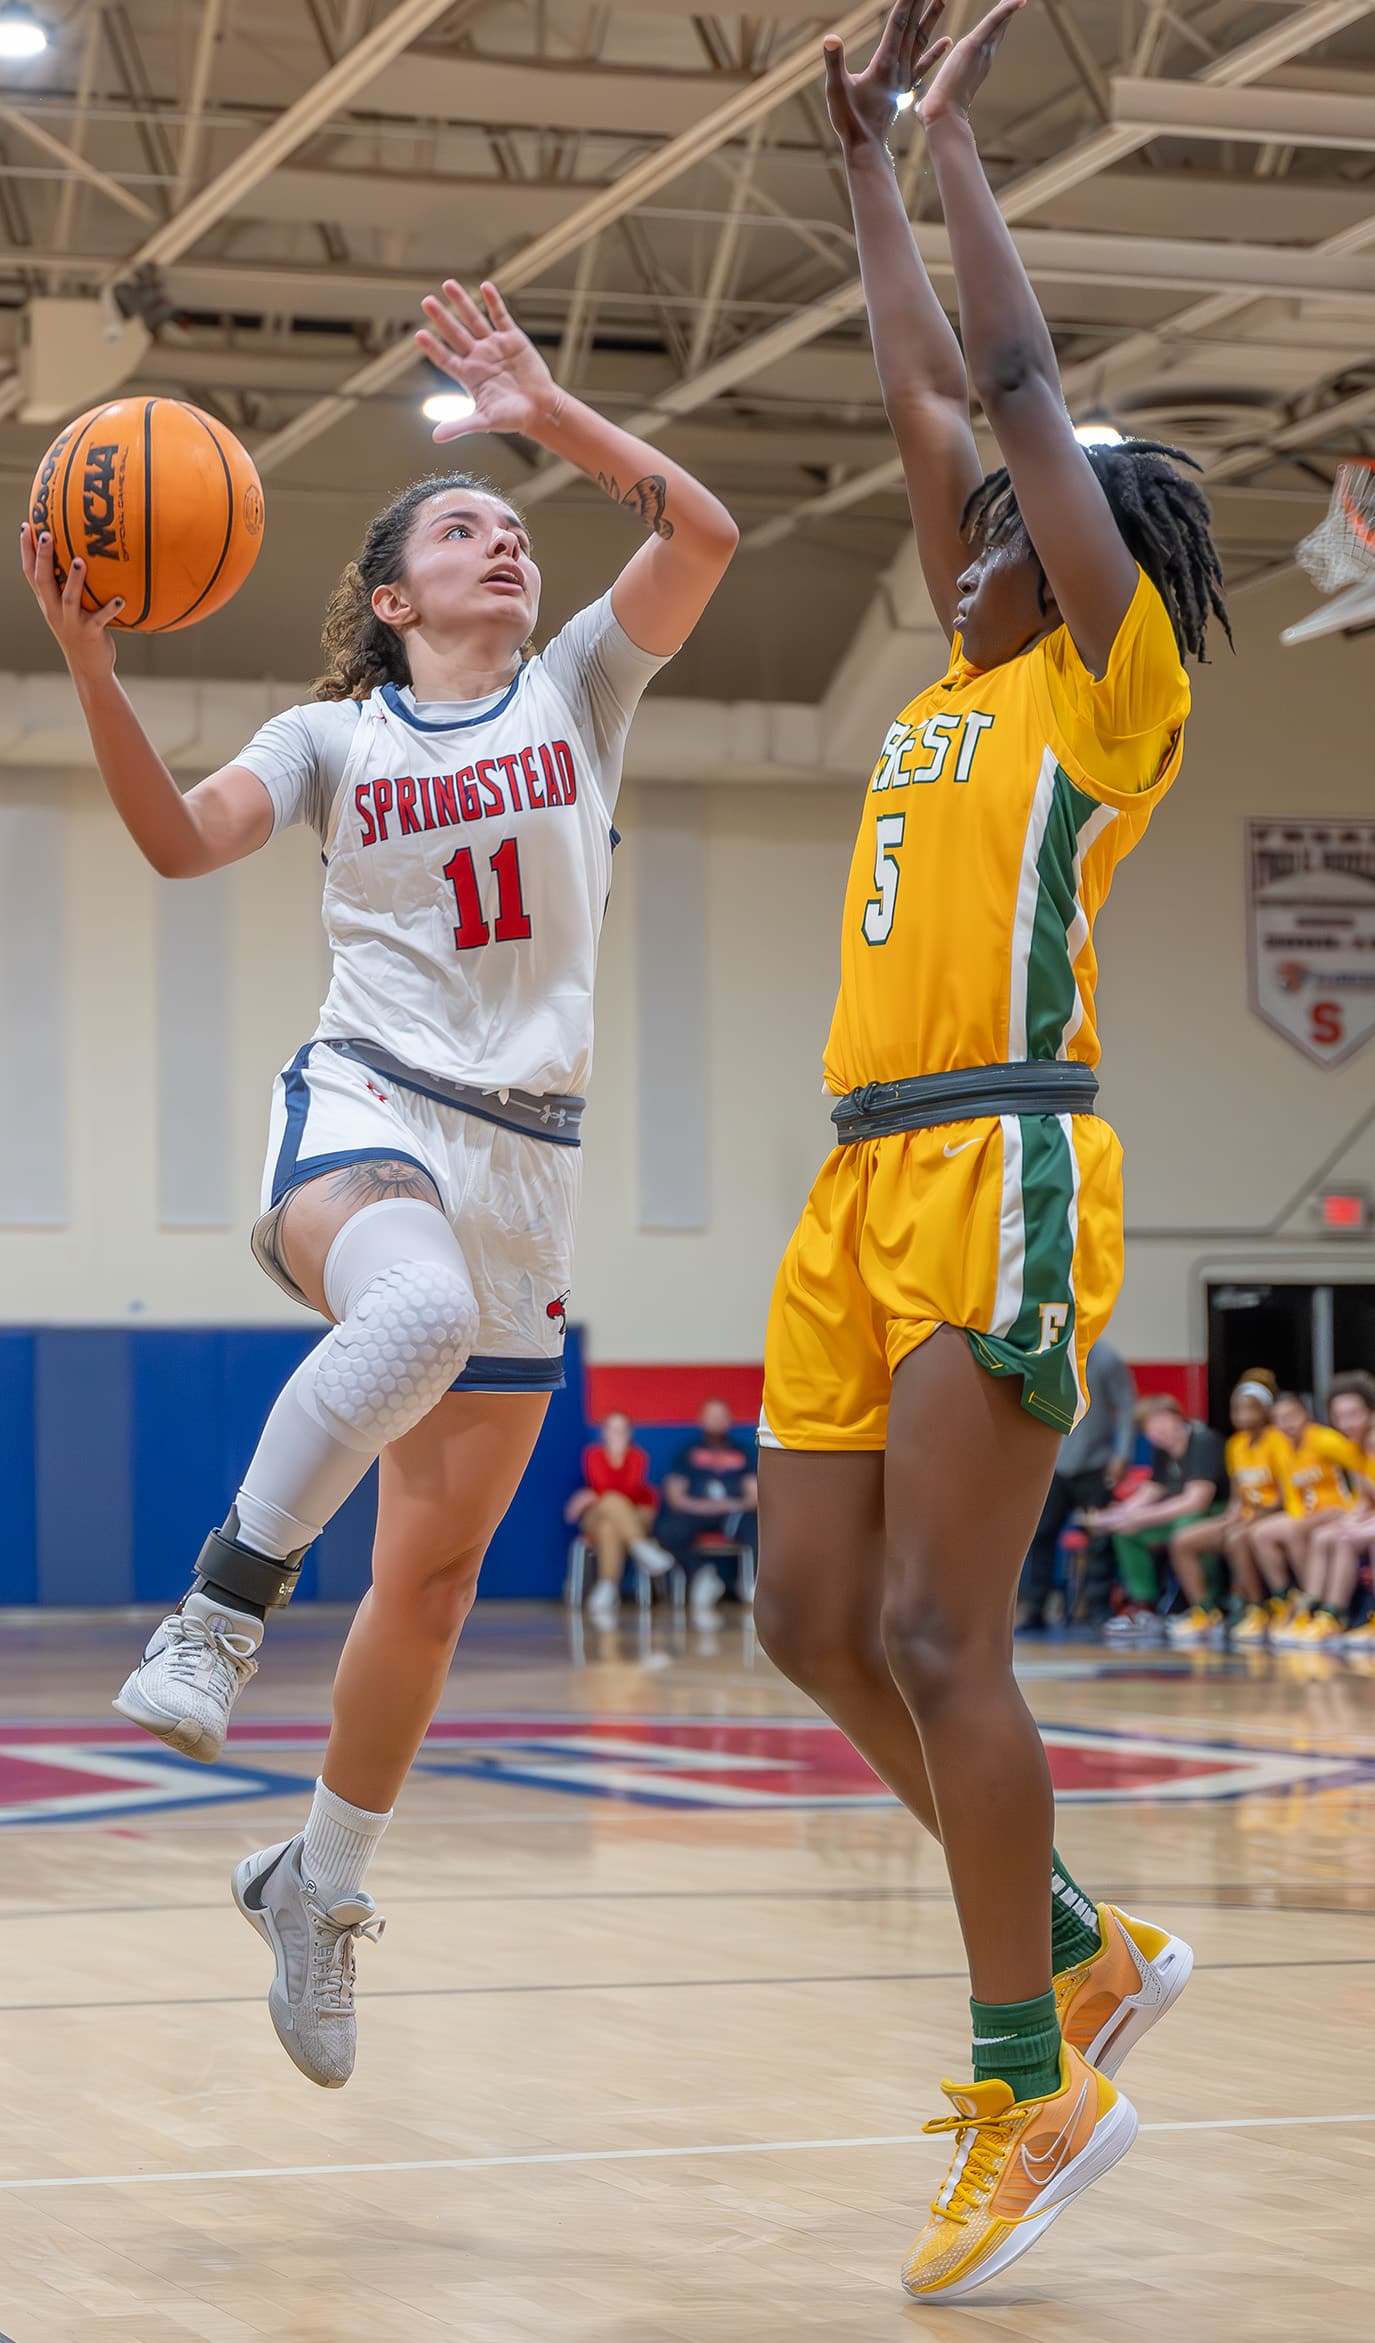 Springstead High School, 11,Samantha Suarez shoots over Forest High defender Janaina Wess ,5, in the 6A Division 4 Championship Game. [Photo by Joe DiCristofalo]